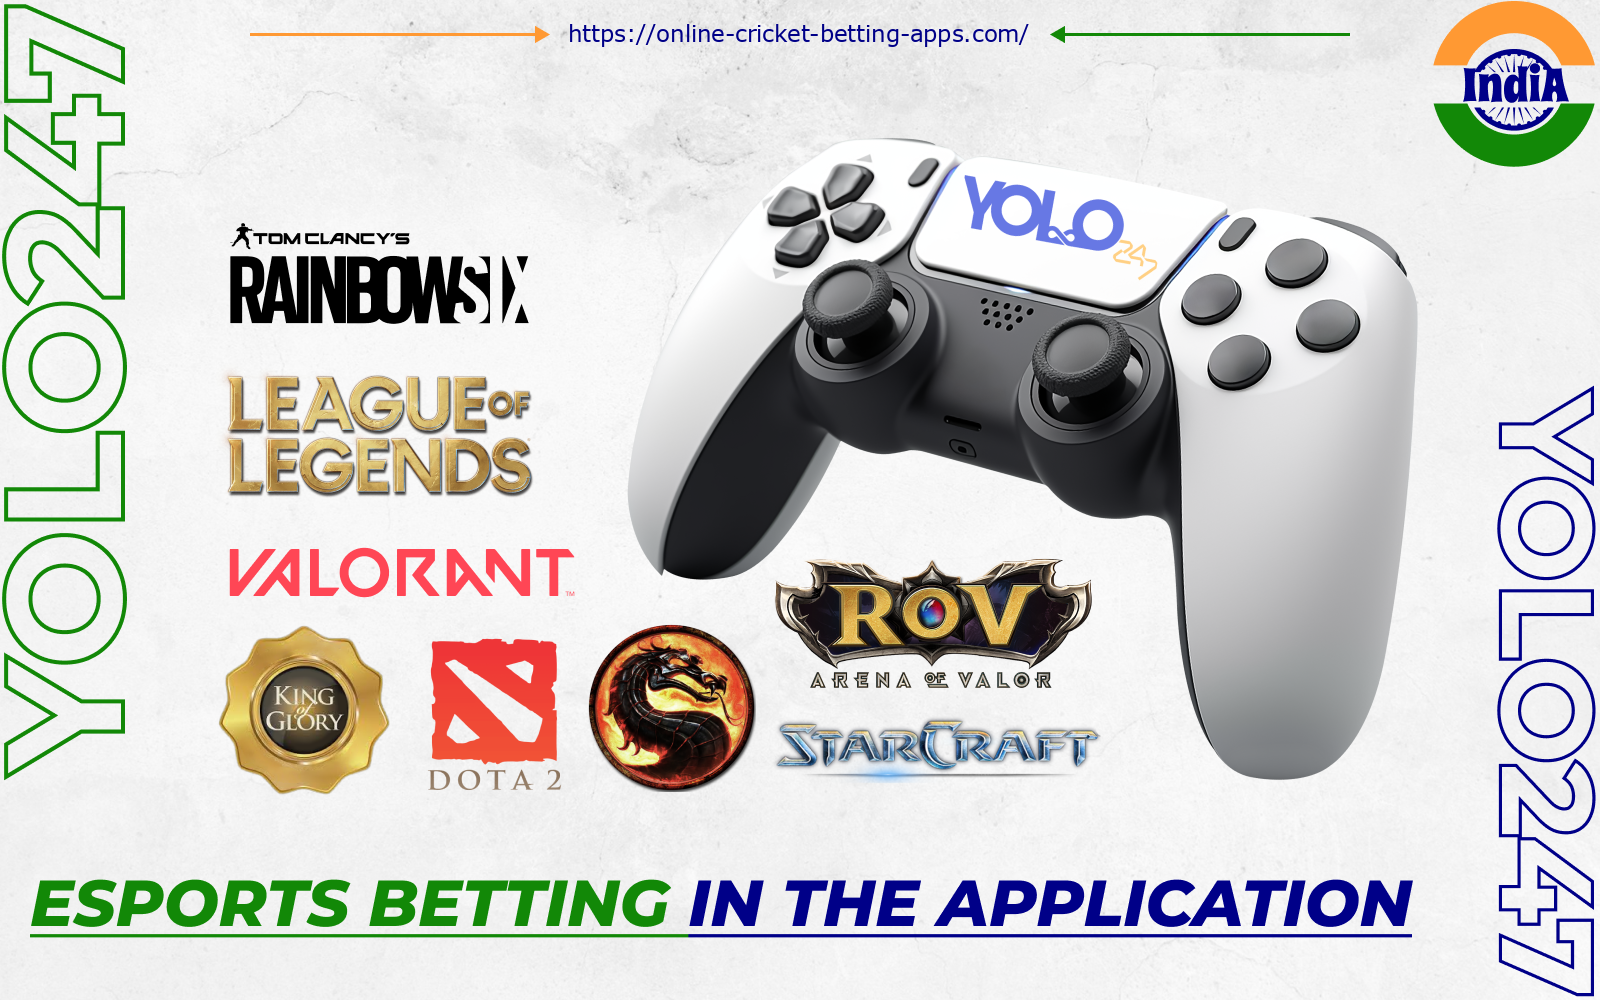 Yolo247 users from India can bet on official cyber sports matches in popular disciplines